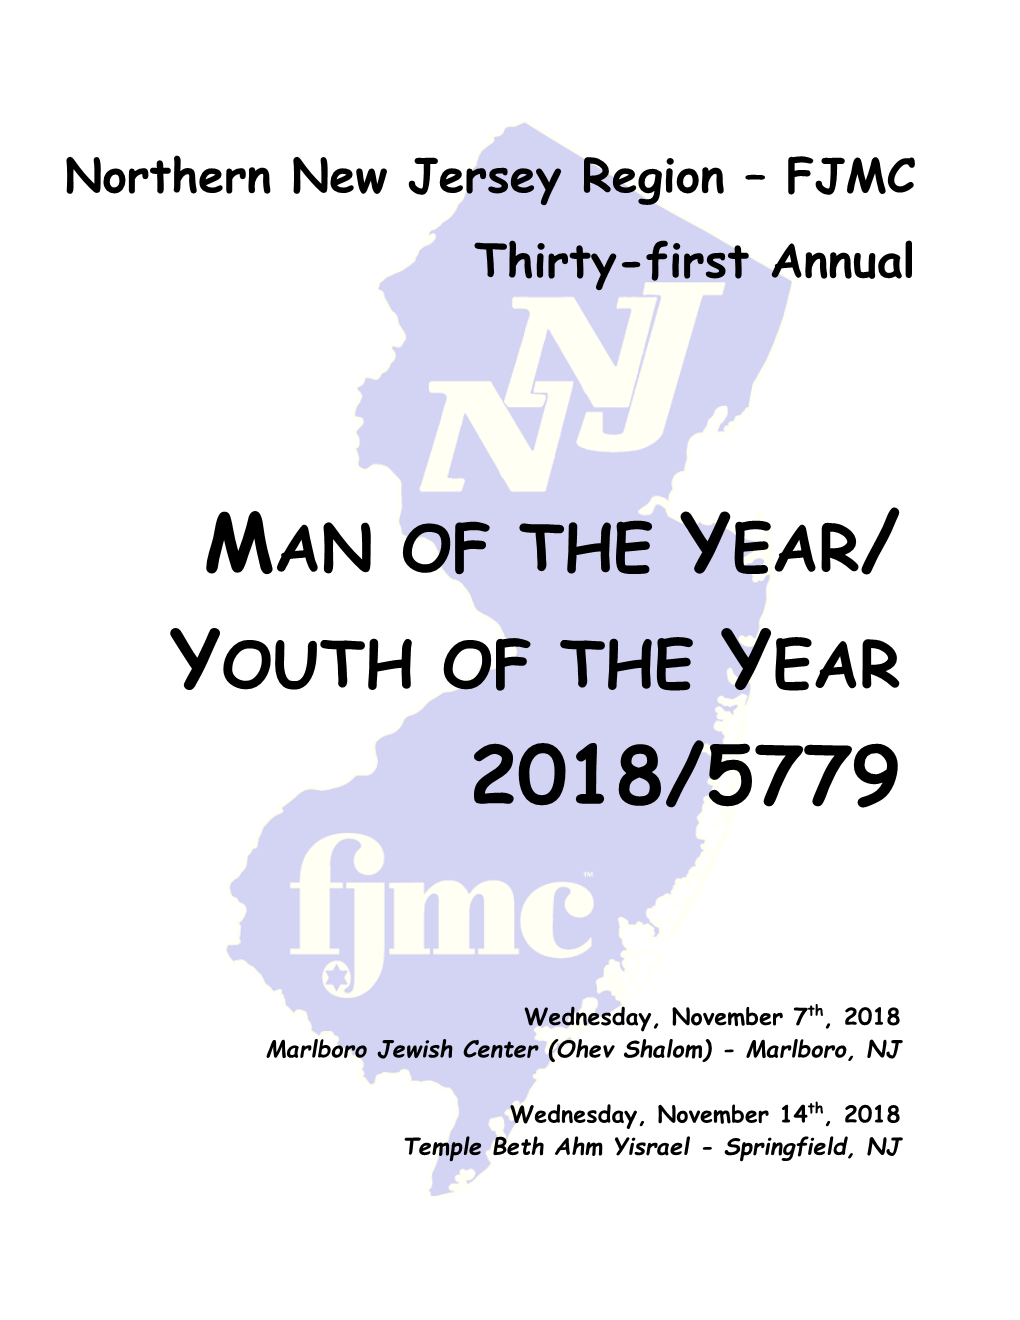 Man of the Year/ Youth of the Year 2018/5779